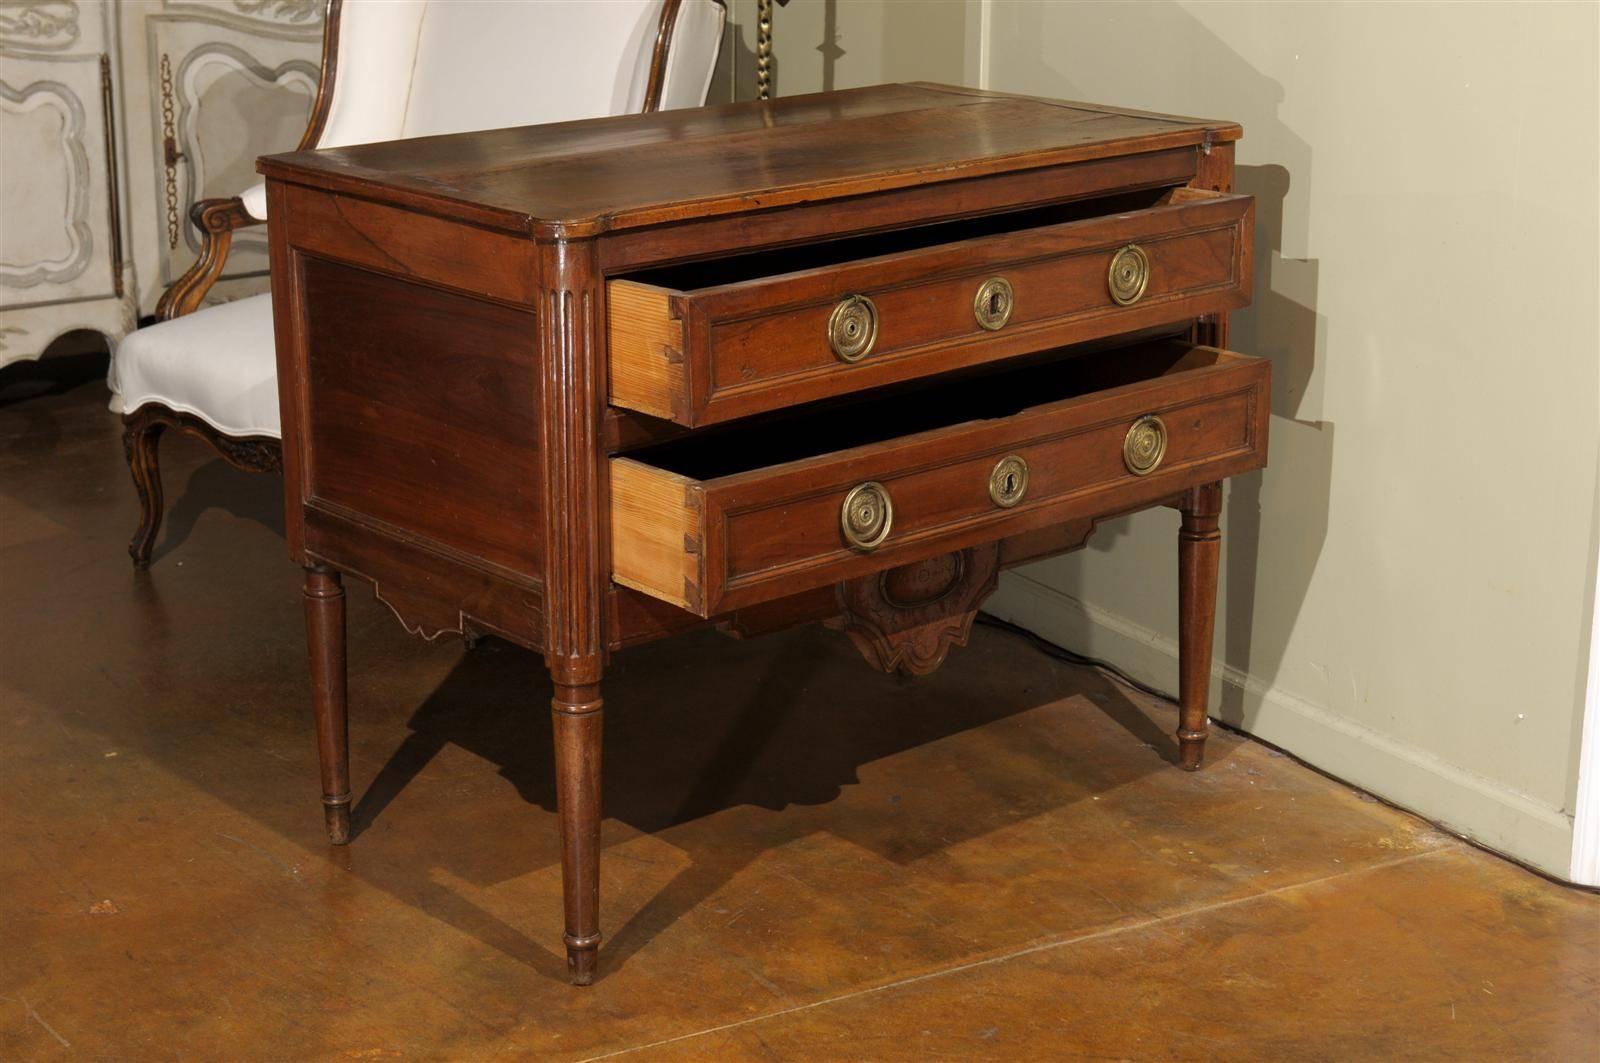 19th Century French Louis XVI Style Walnut Two-Drawer Commode With Cartouche Motif For Sale